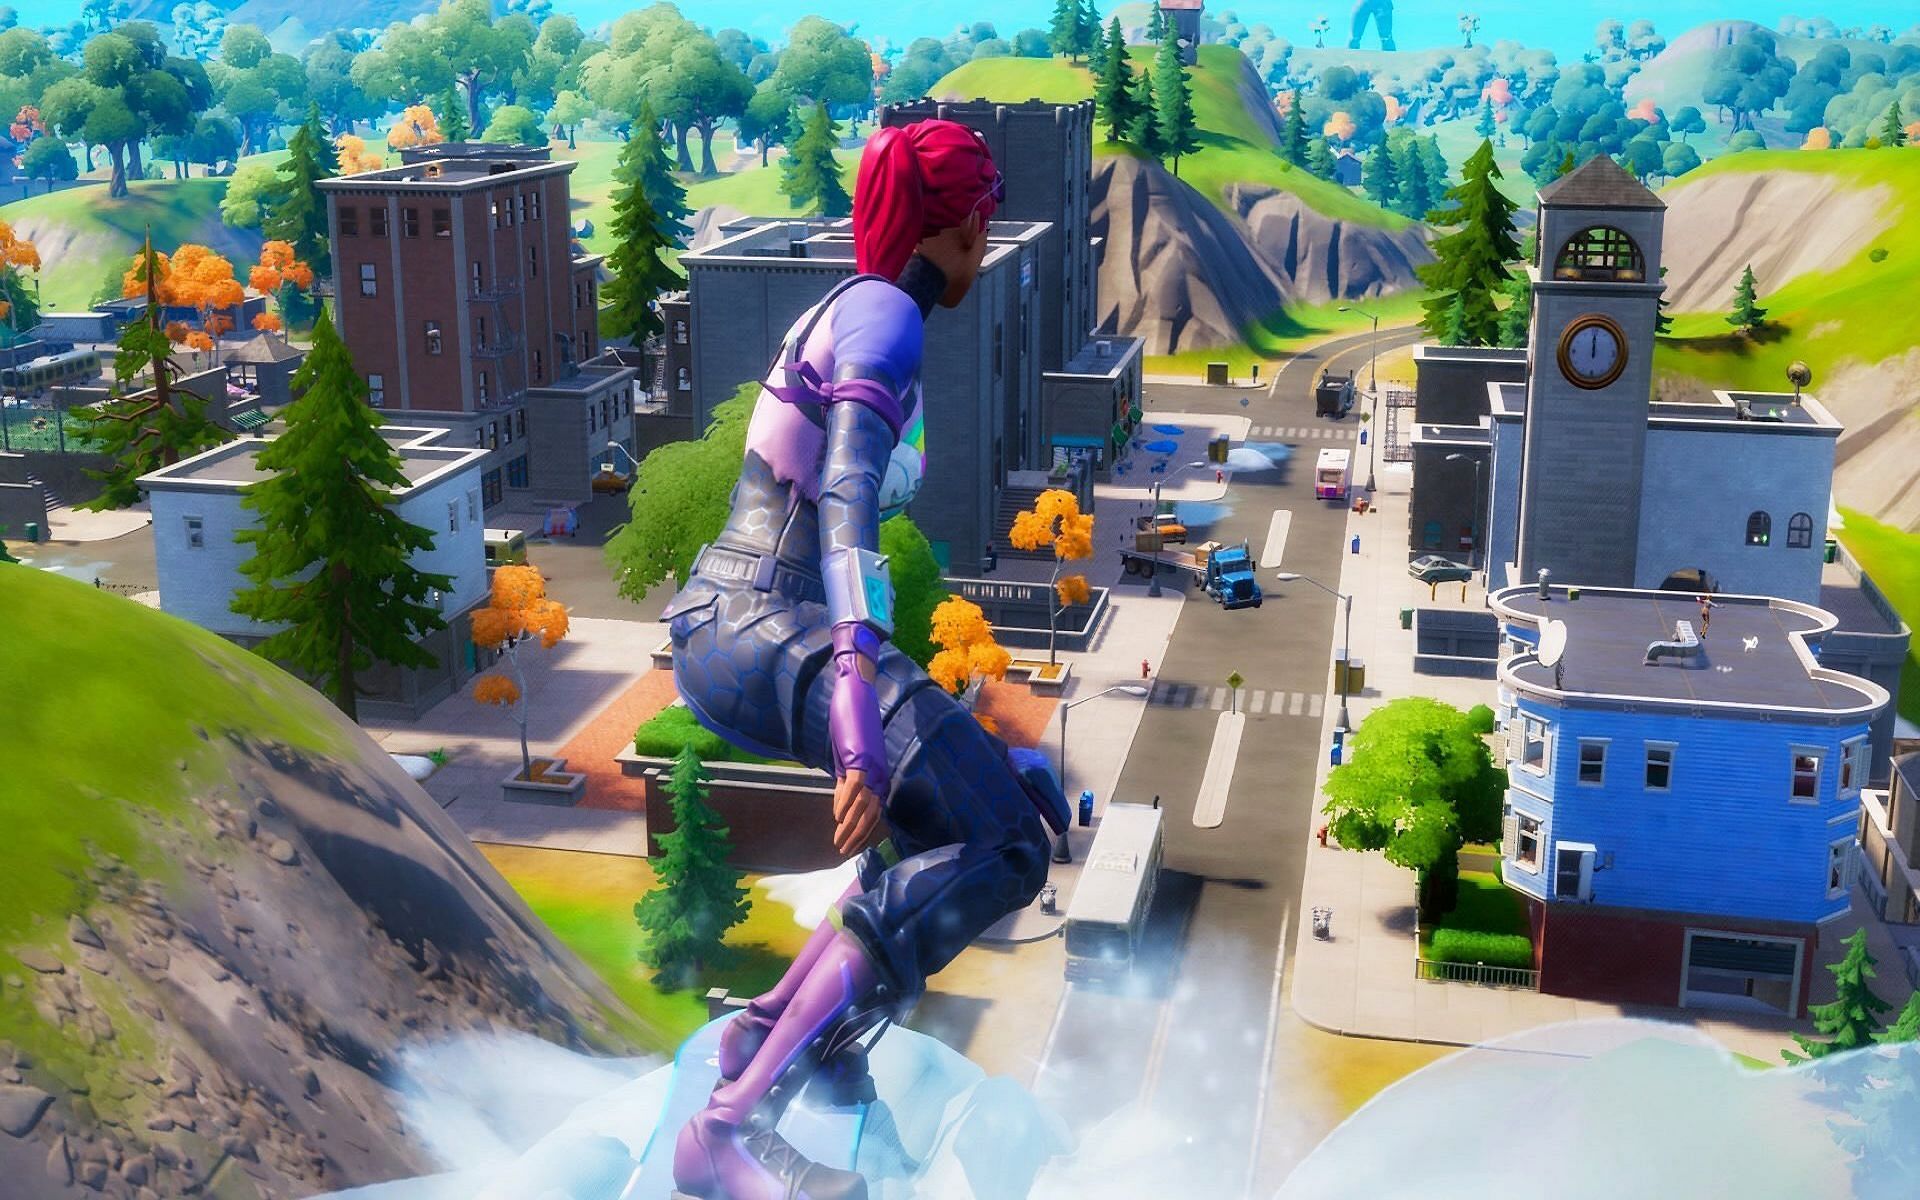 Tilted Towers must survive in Fortnite Chapter 3! (Image via Twitter/Michael610YT)